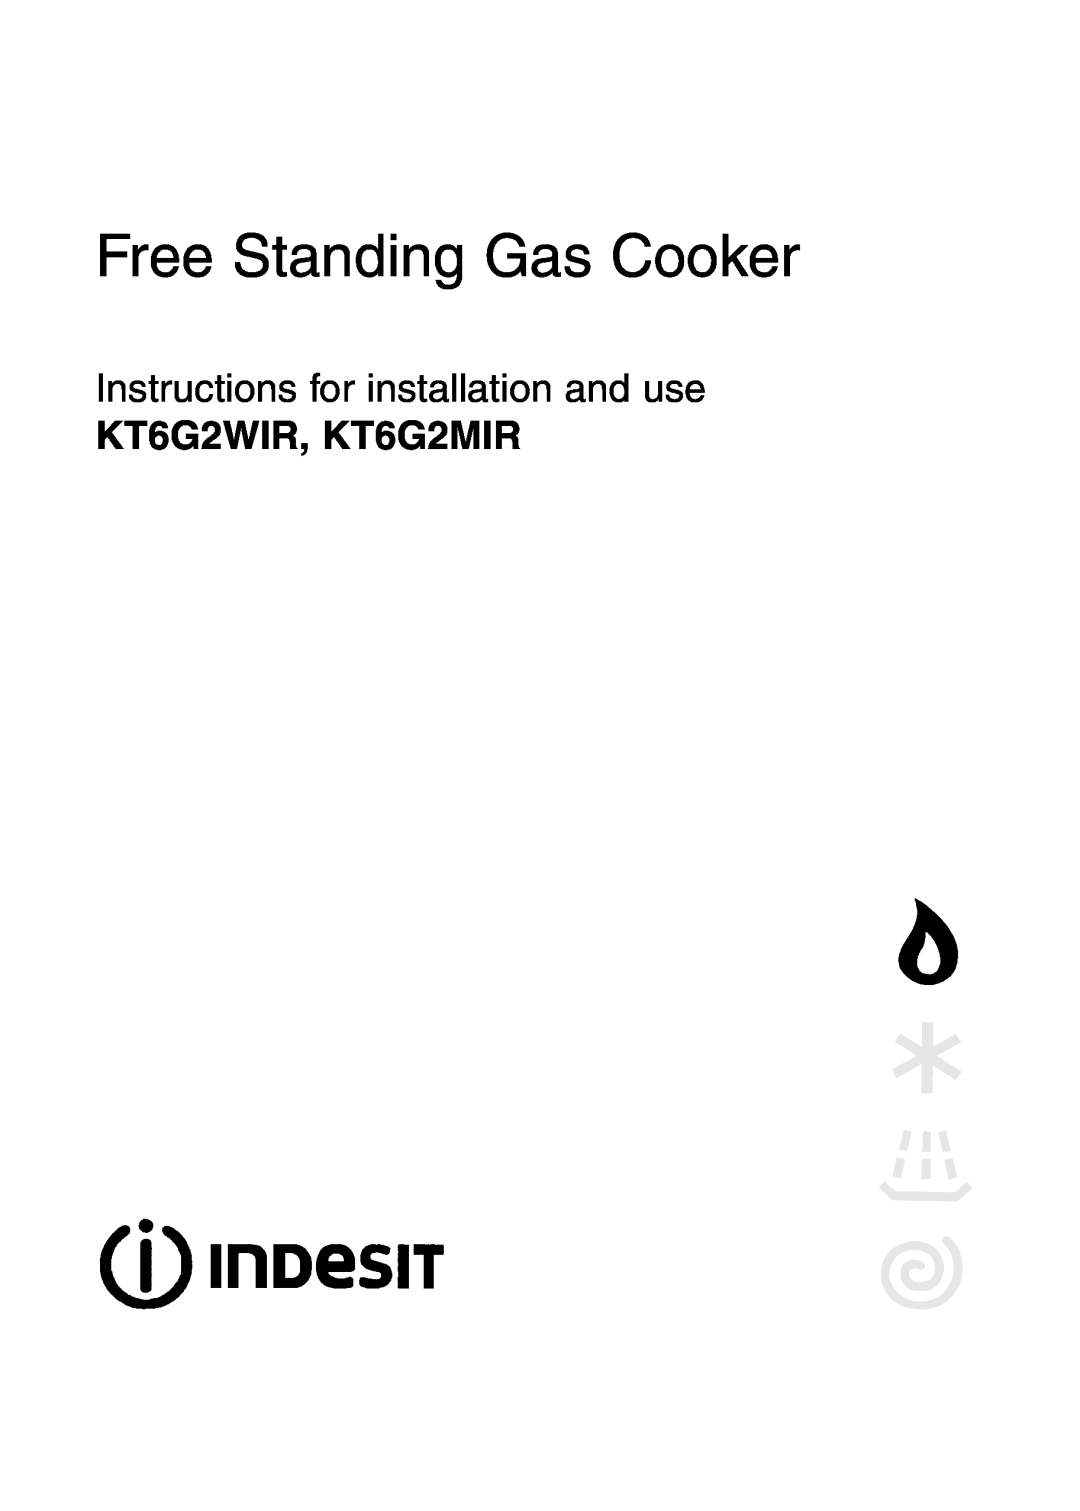 Indesit manual Free Standing Gas Cooker, Instructions for installation and use, KT6G2WIR, KT6G2MIR 